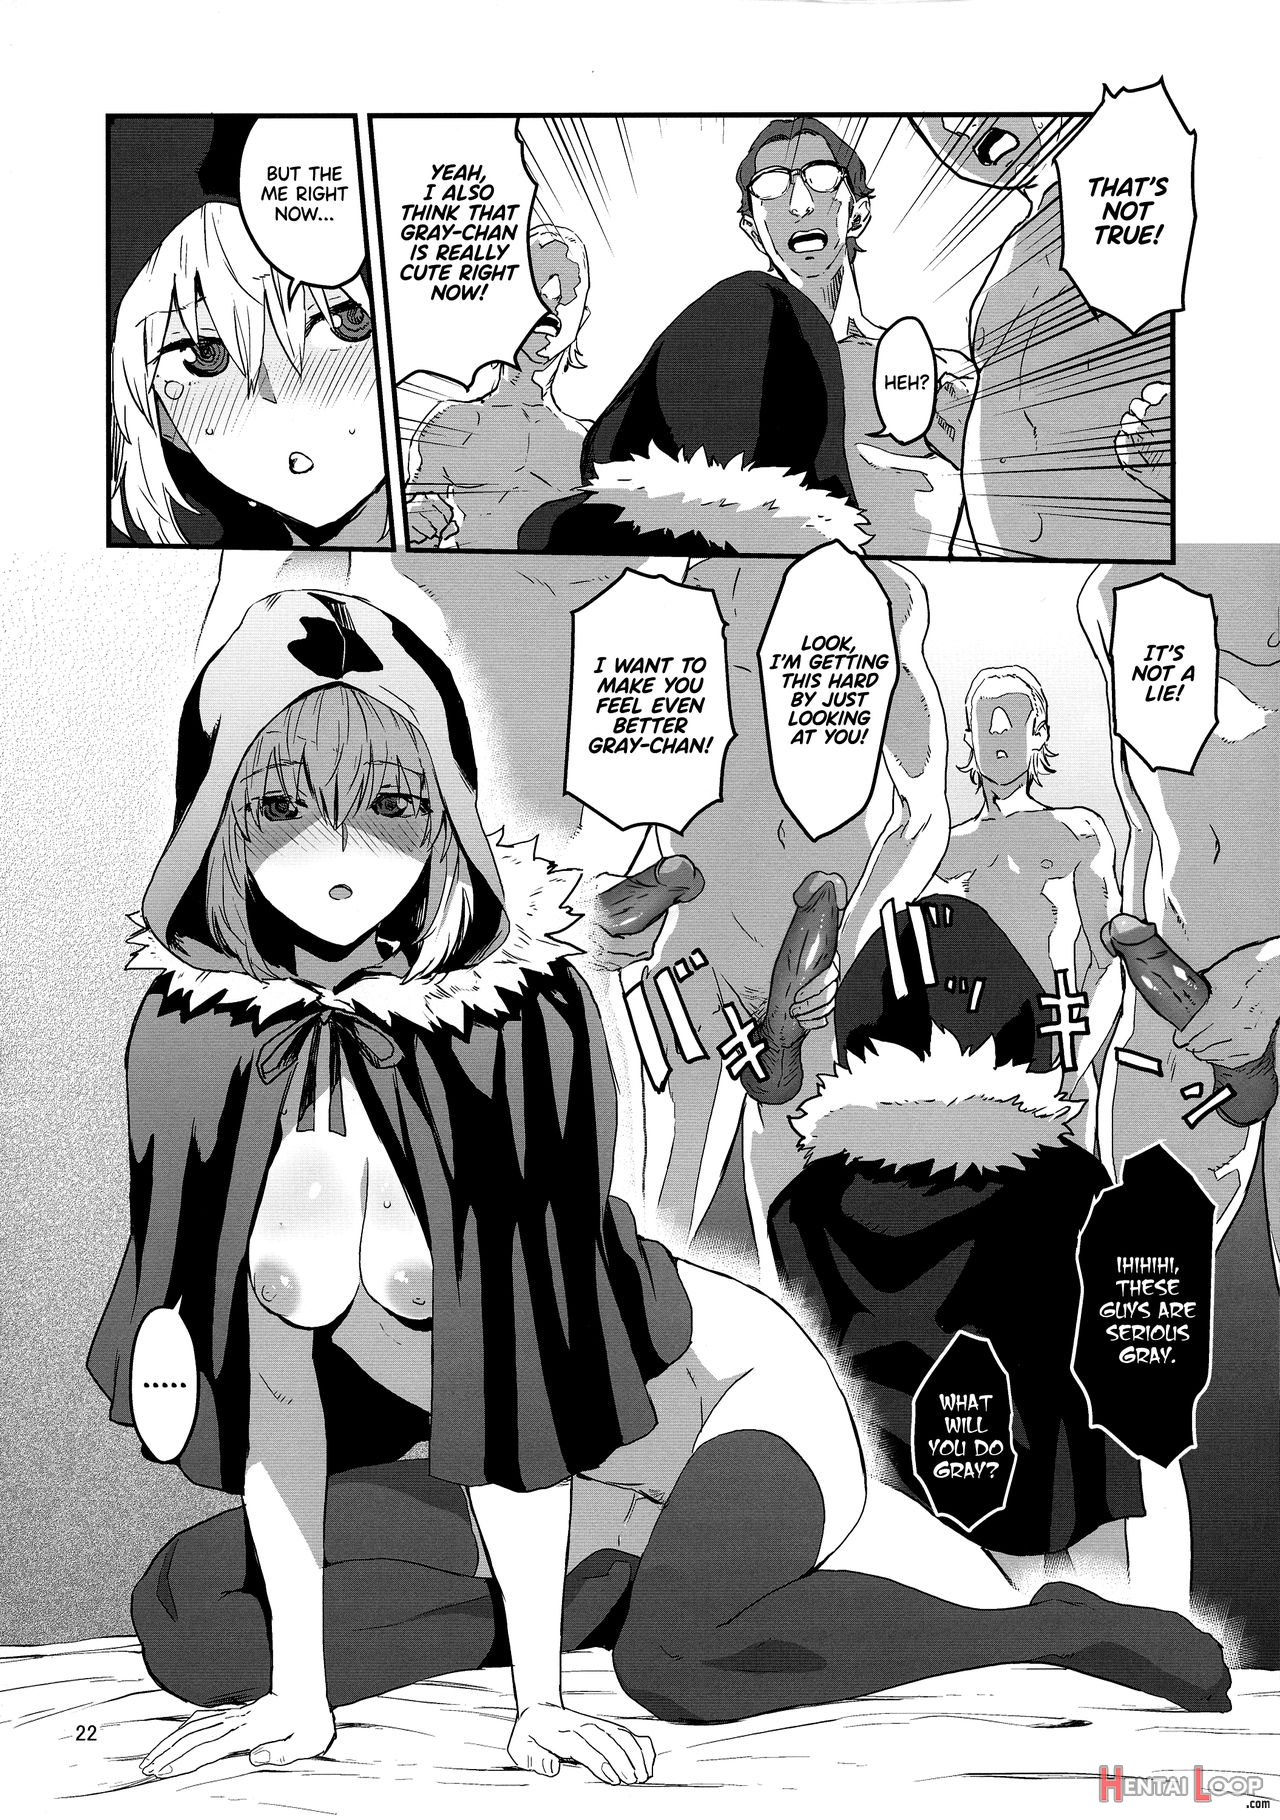 Taking Advantage Of Gray-chan Weakness, We Graduated From Our Virginity. page 22